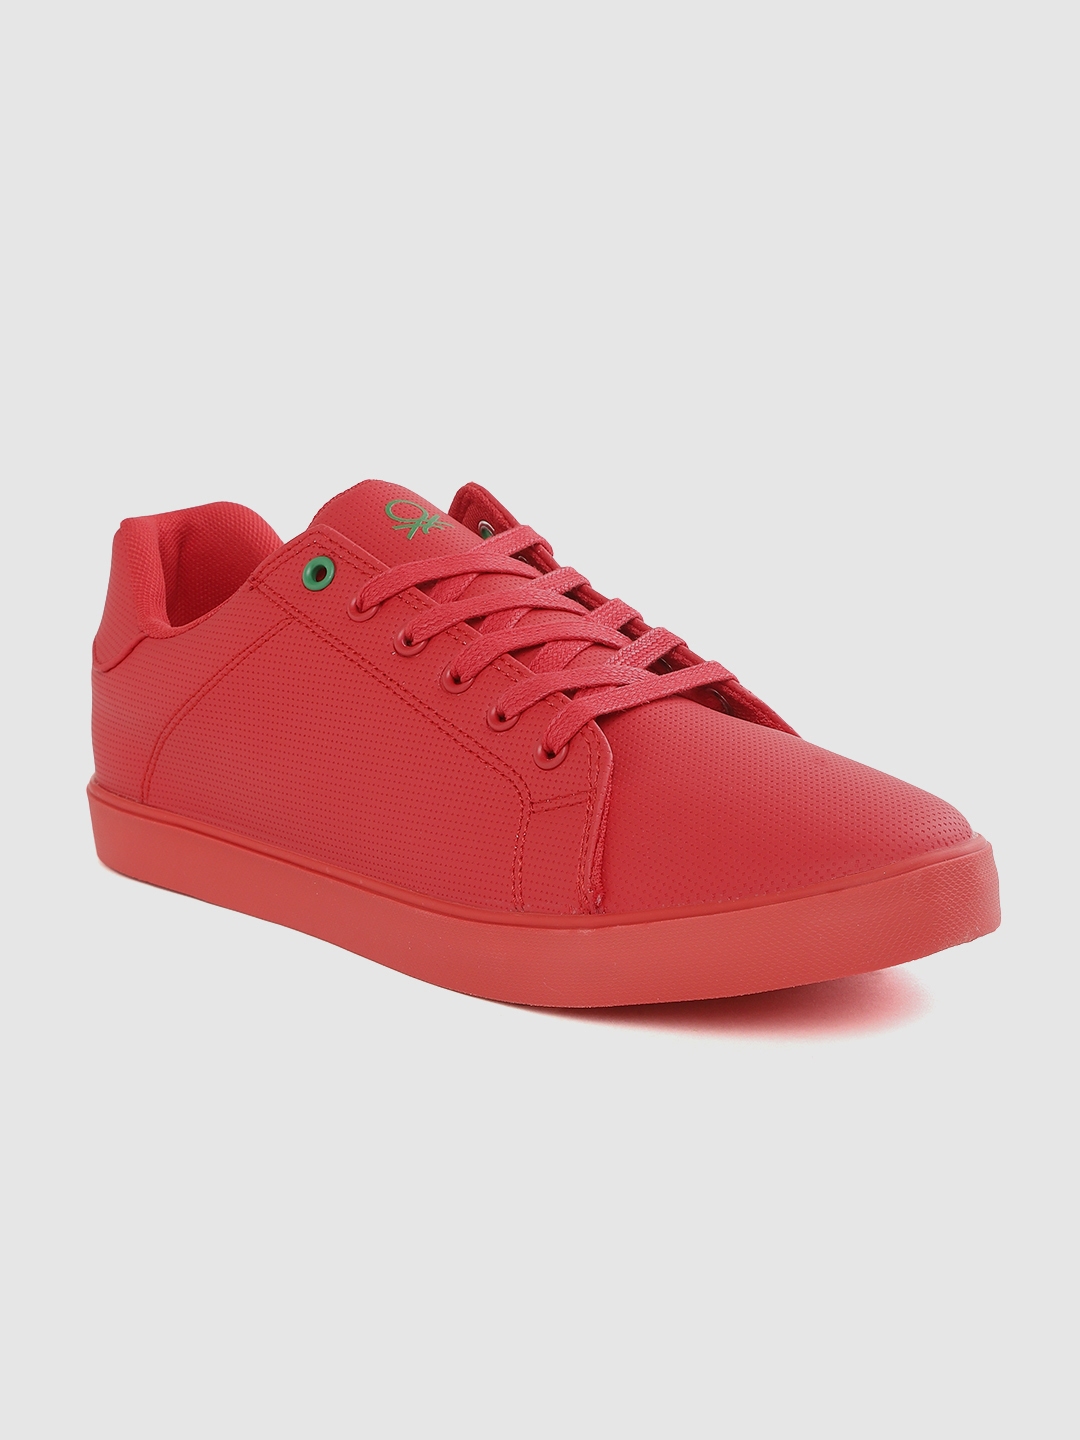 Buy United Colors Of Benetton Men Red Textured Sneakers - Casual Shoes ...